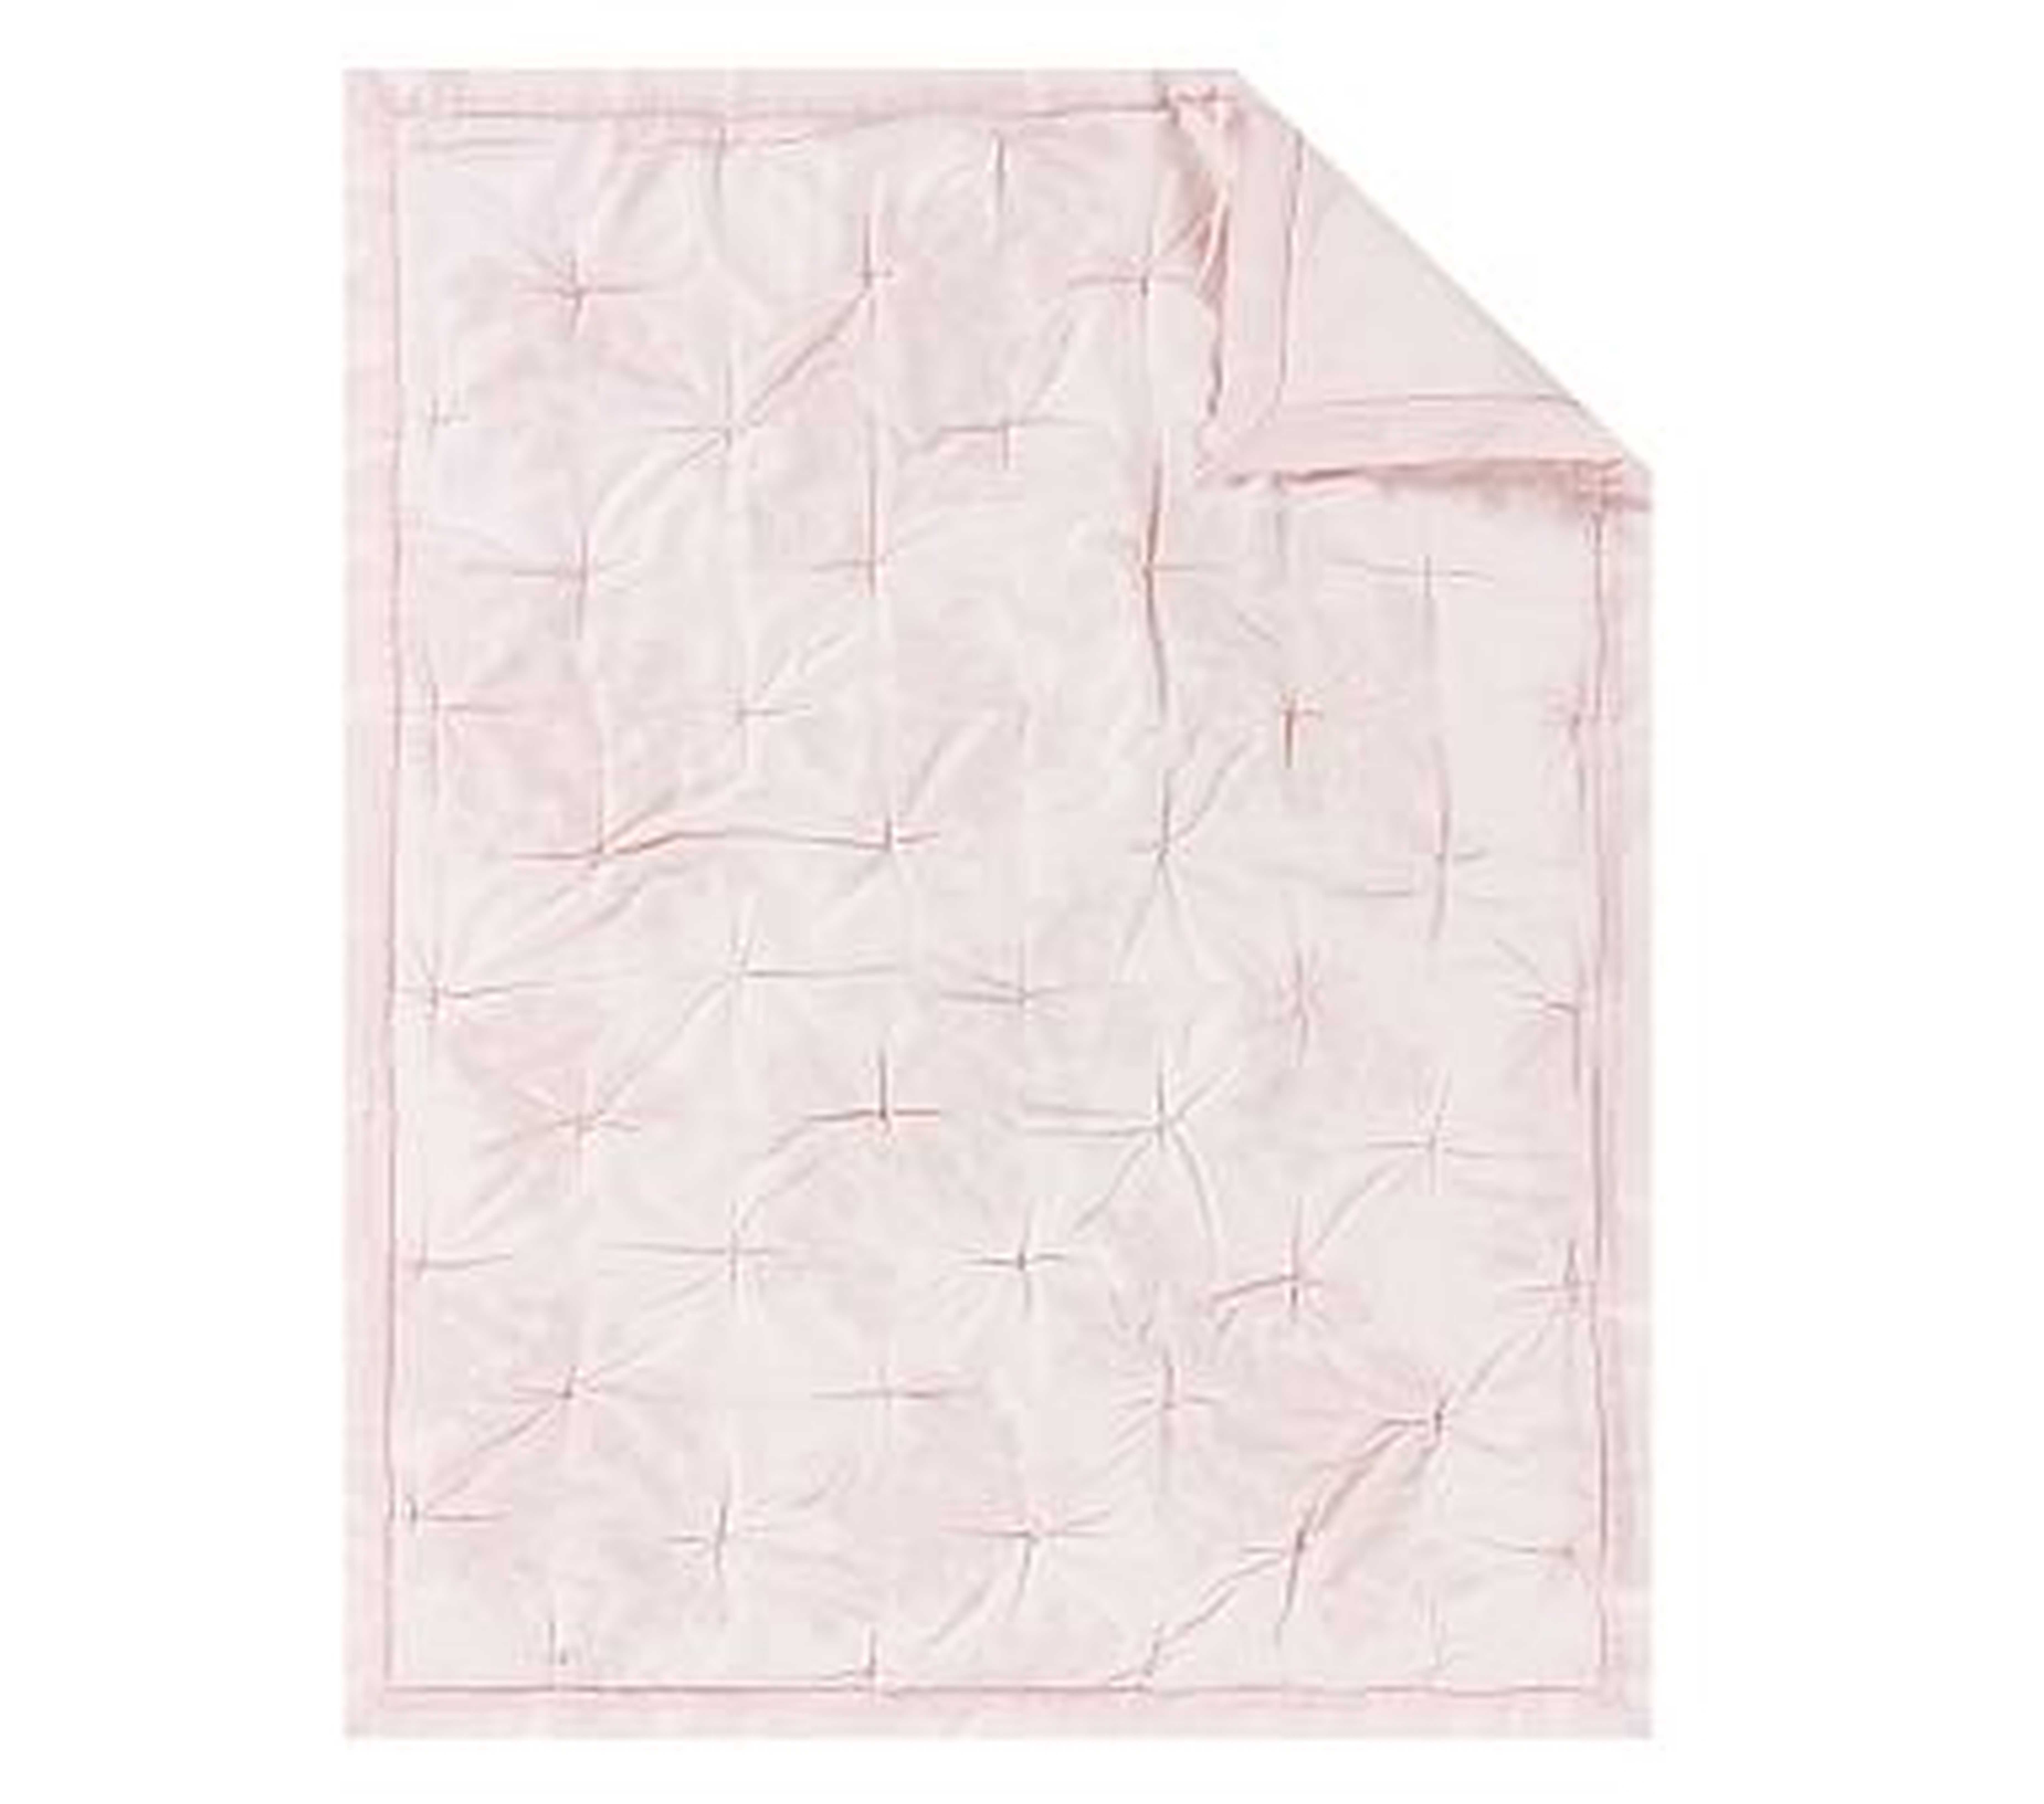 Monique Lhuillier Ethereal Lace Baby Quilt, Blush - Pottery Barn Kids